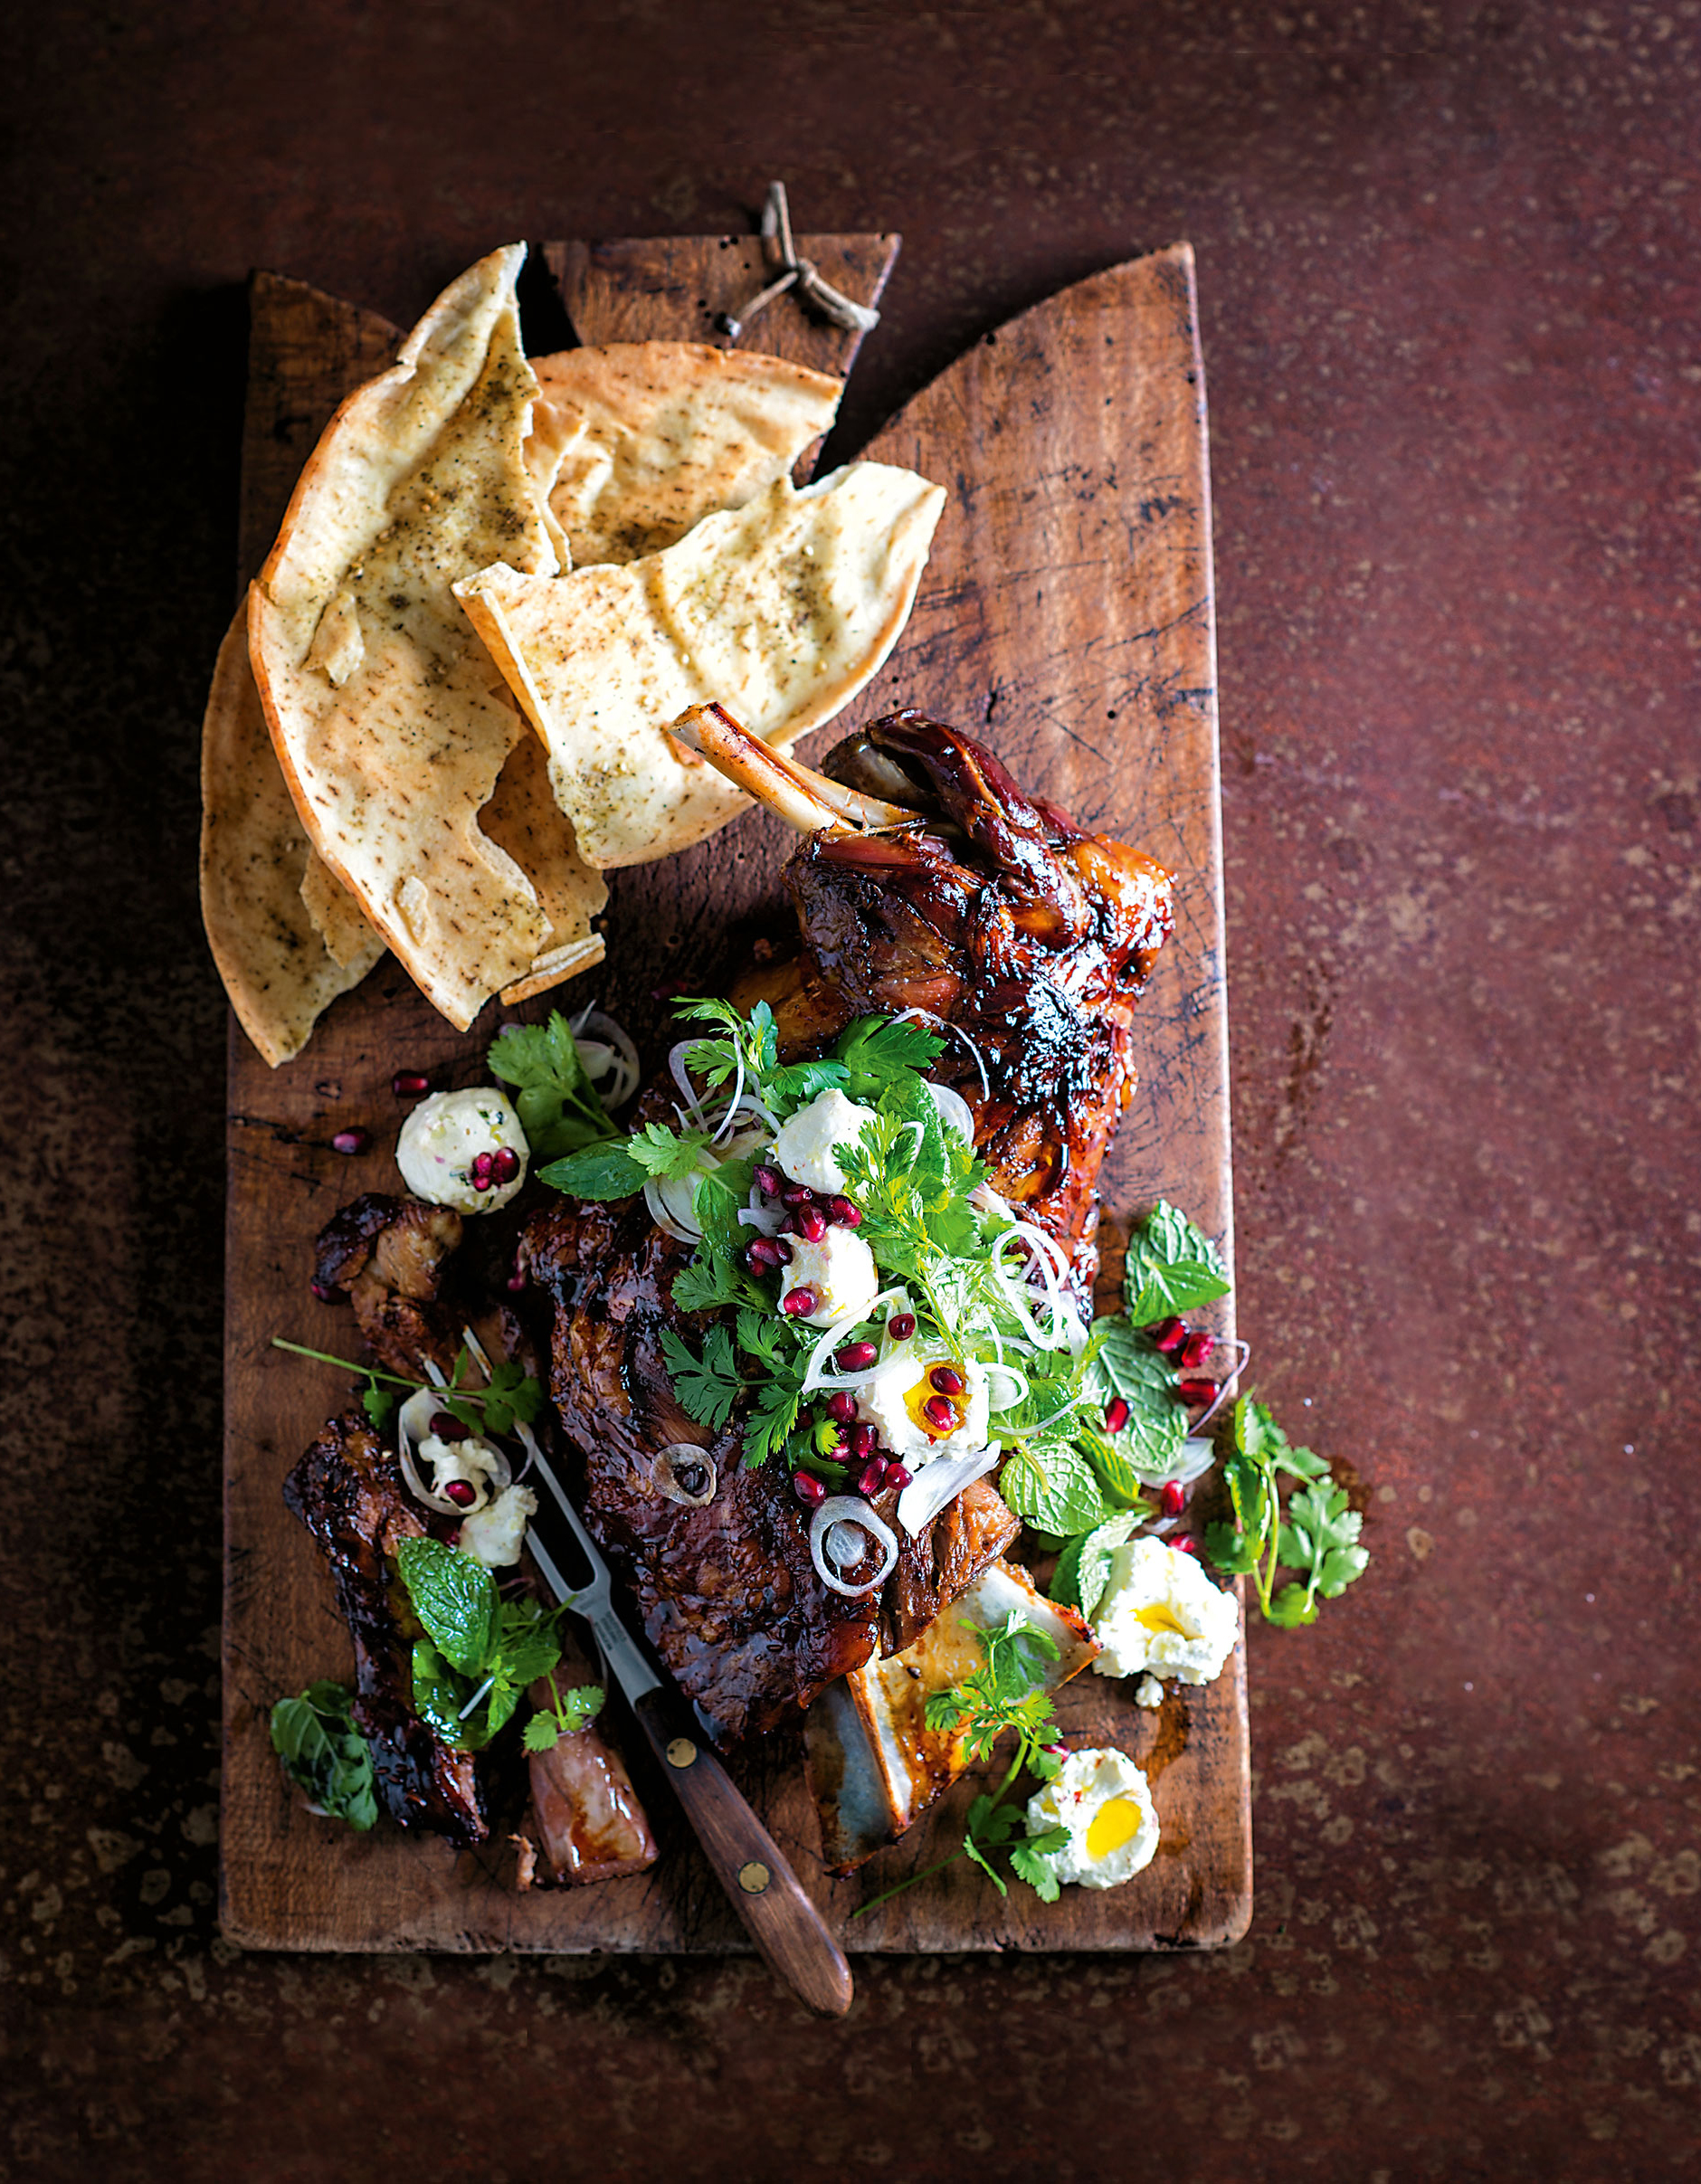 Slow-Roasted Cumin Lamb Shoulder with Marinated Labne